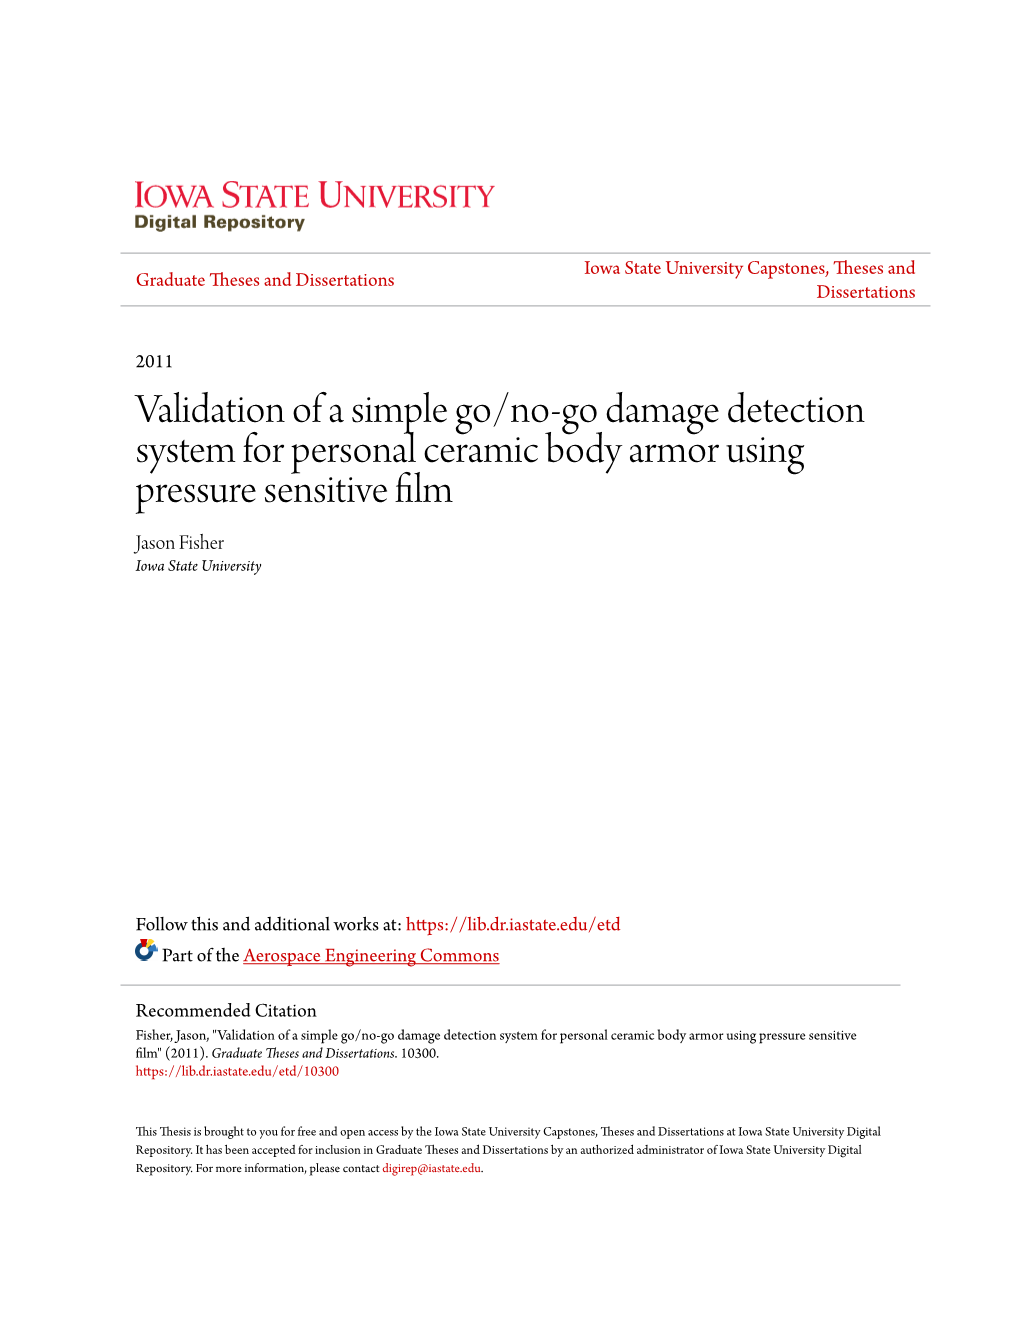 Validation of a Simple Go/No-Go Damage Detection System for Personal Ceramic Body Armor Using Pressure Sensitive Film Jason Fisher Iowa State University